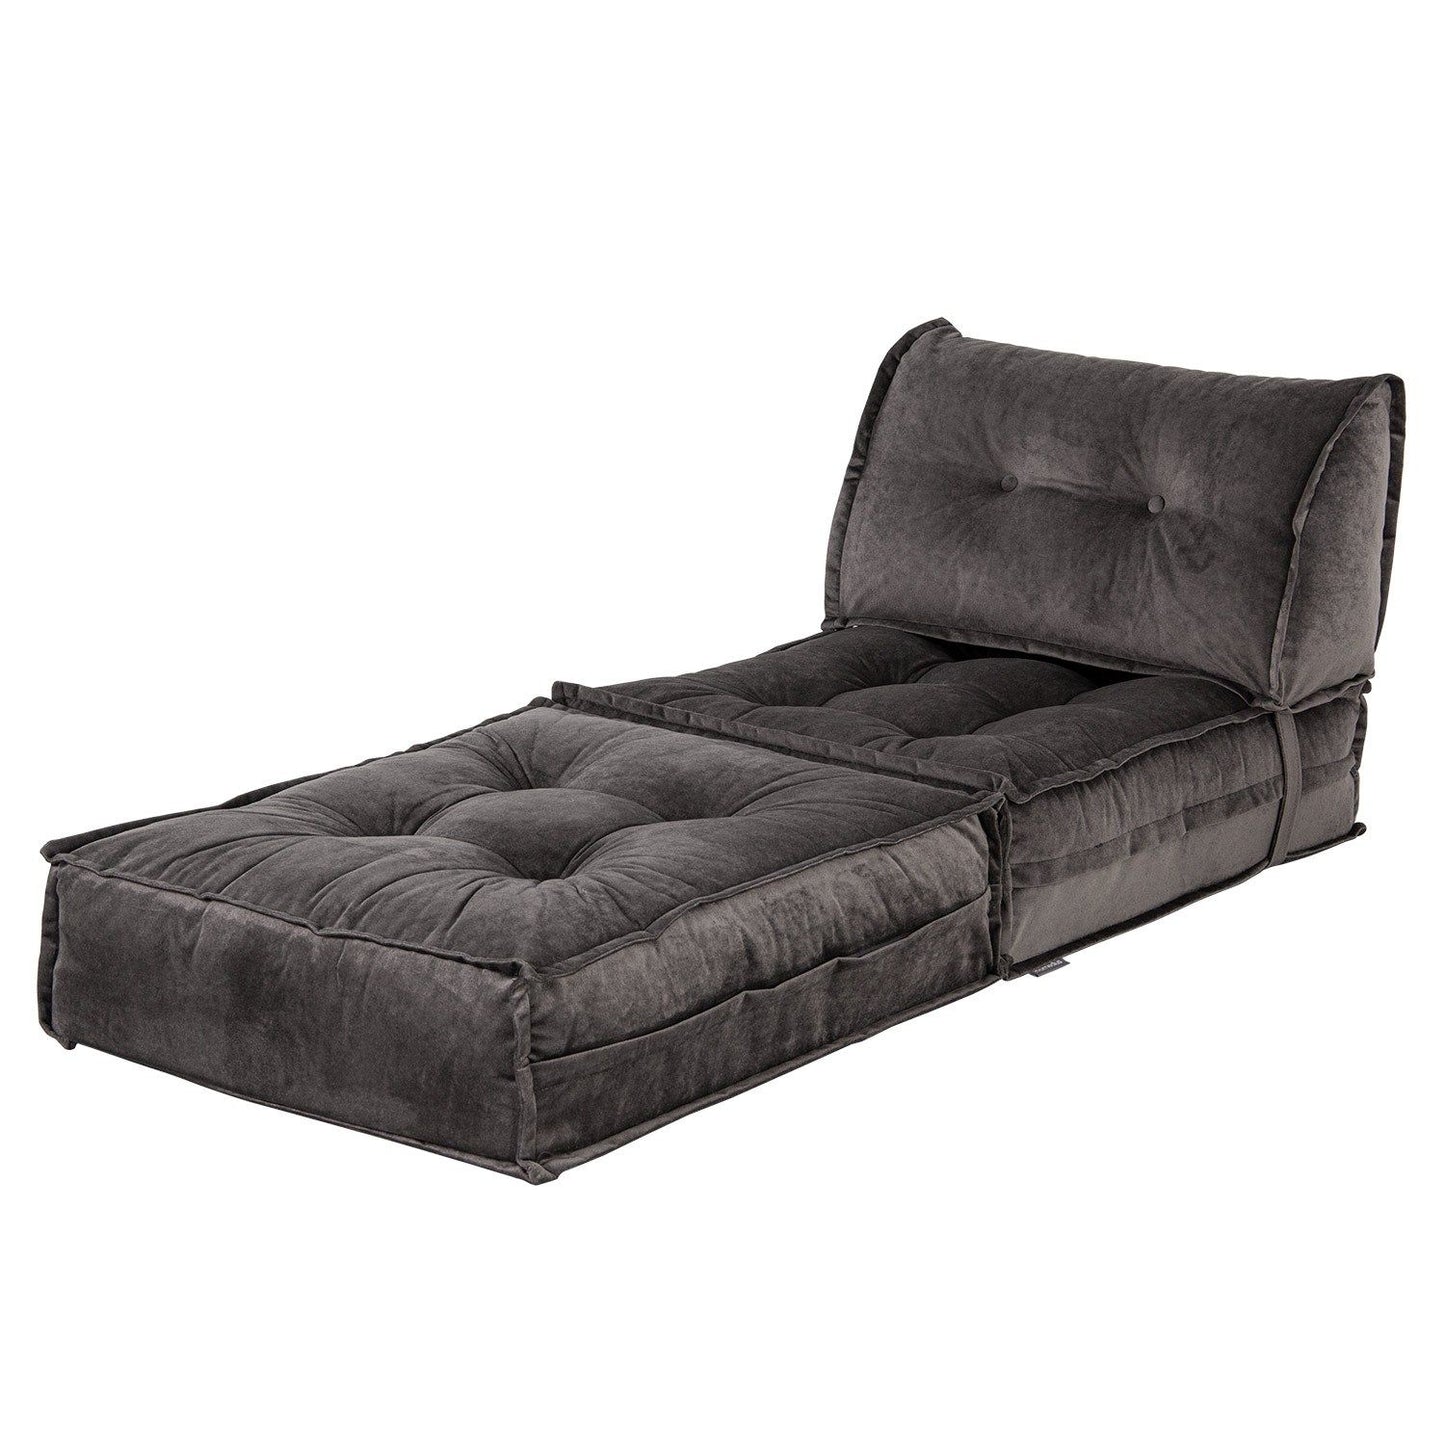 Mocca - Anthracite - 1-Seat Sofa-Bed